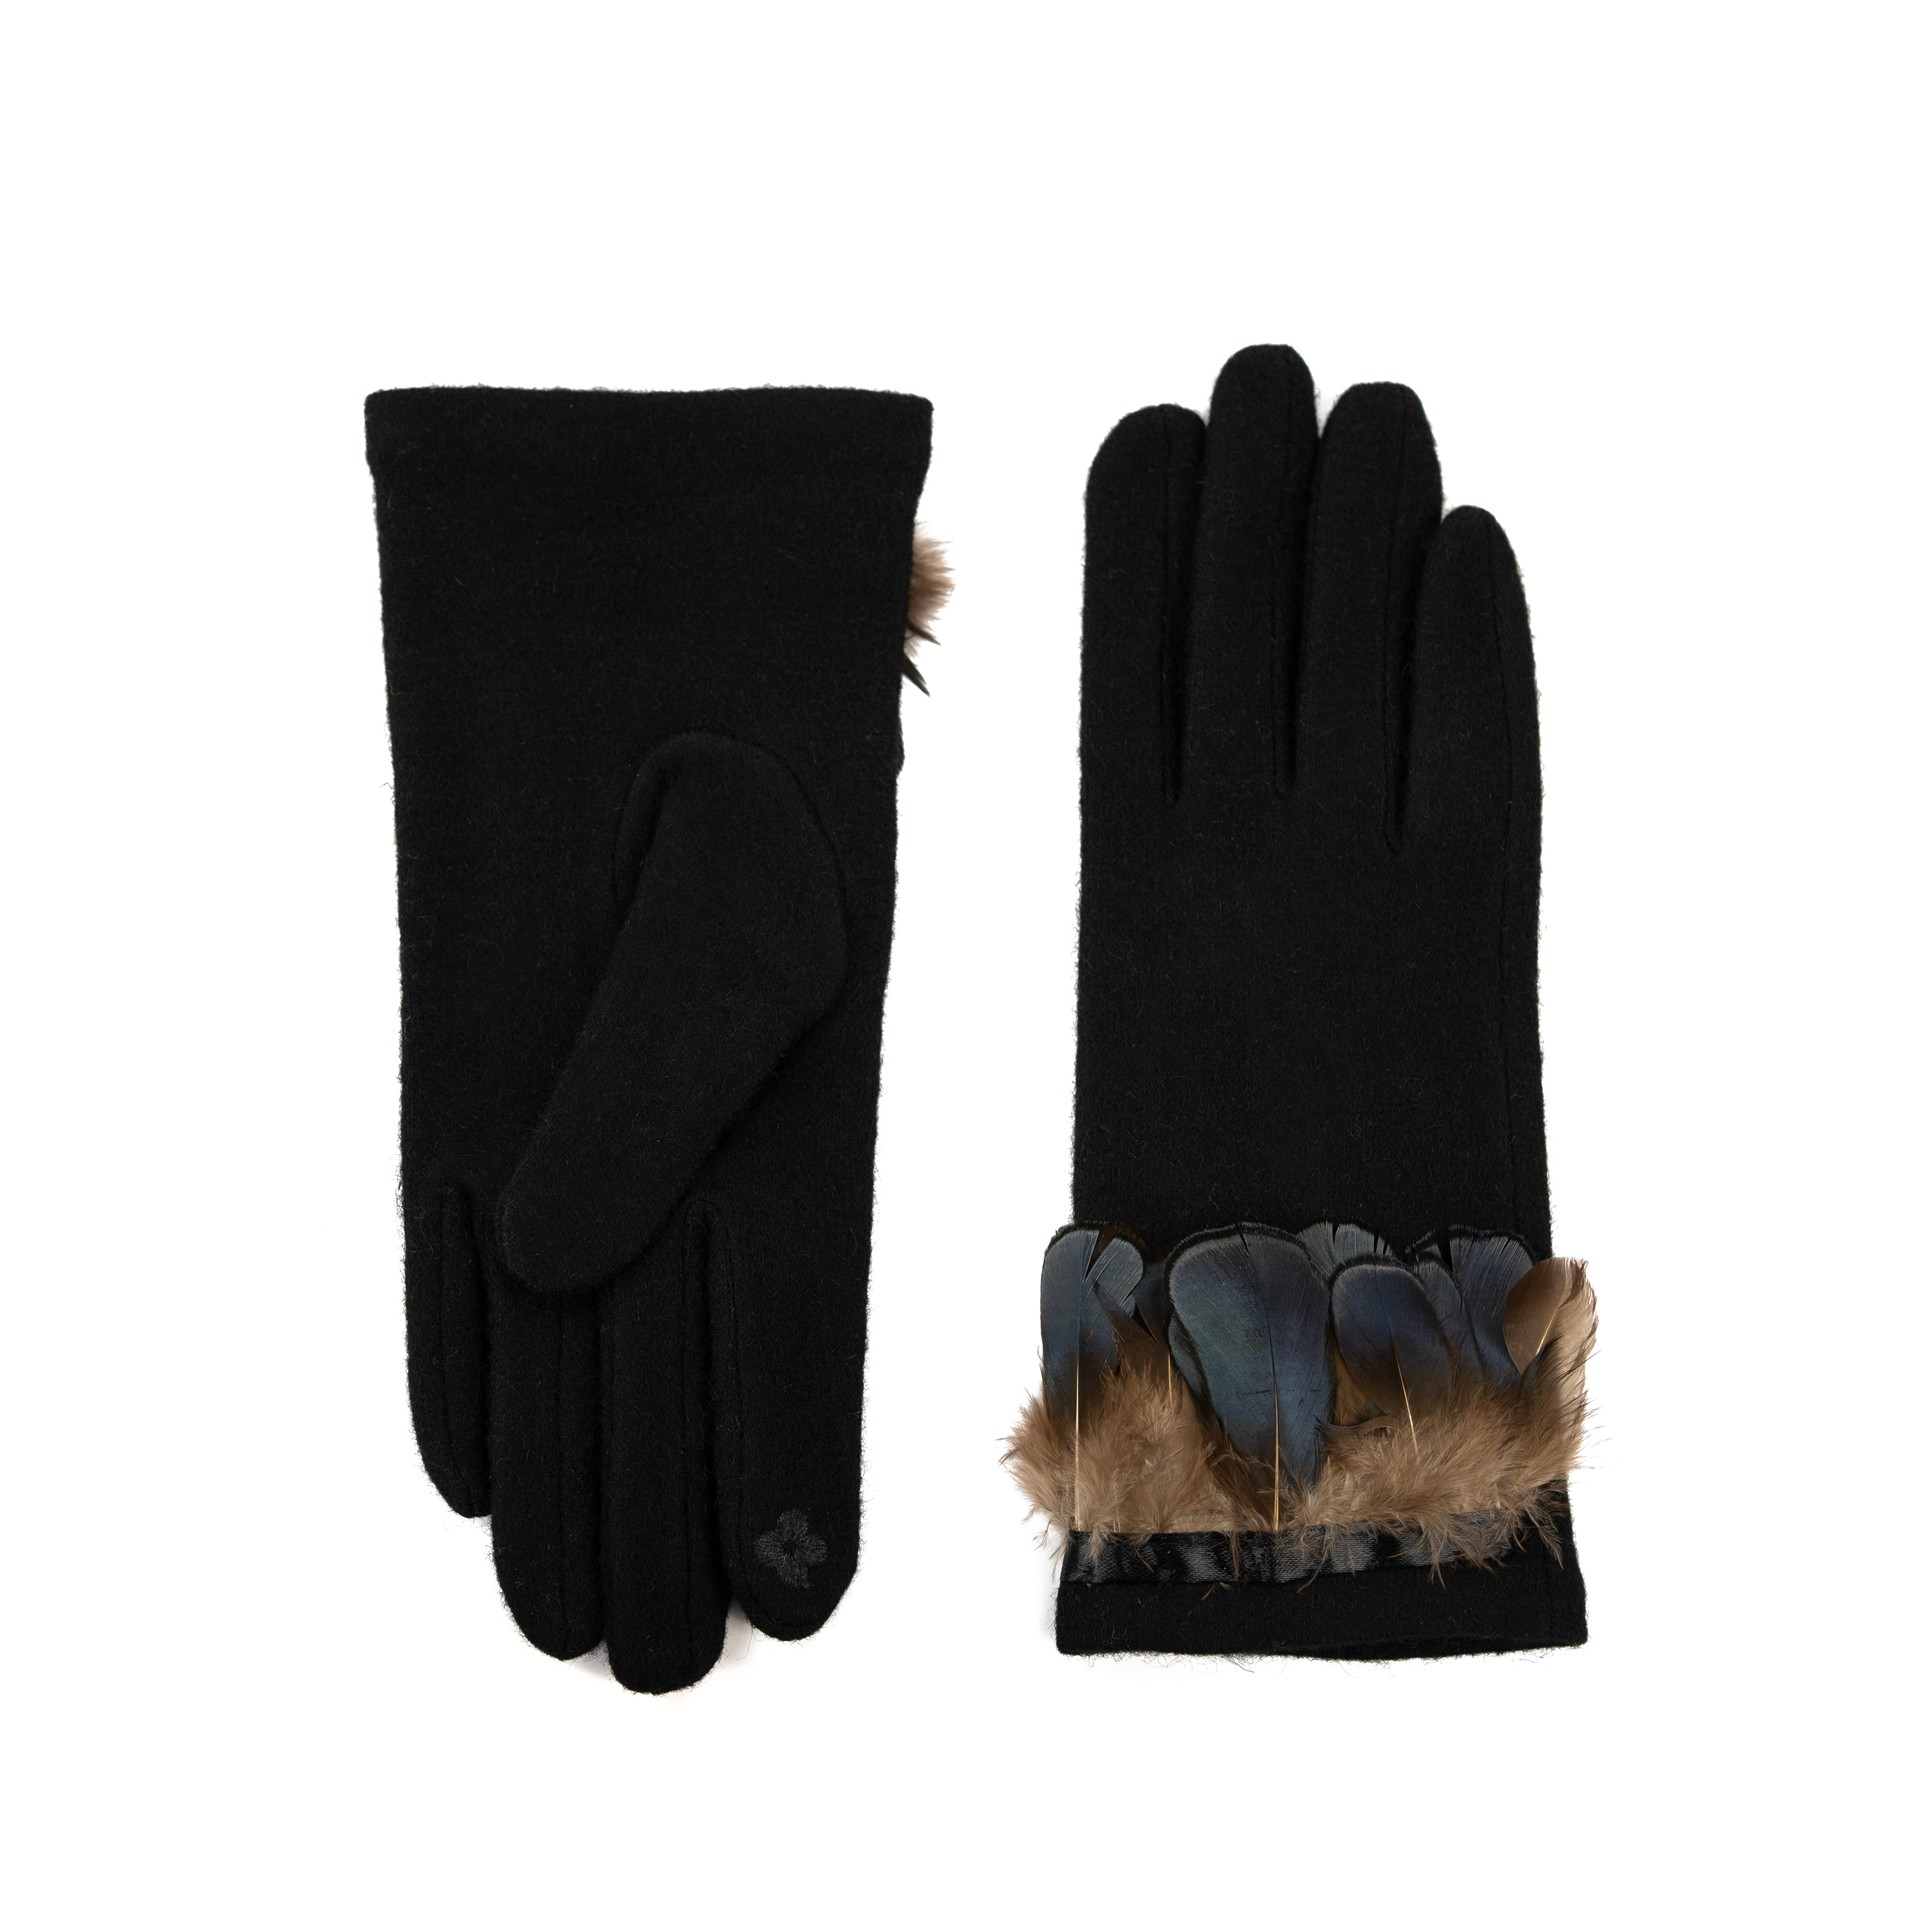 Art Of Polo Woman's Gloves rk22912-1